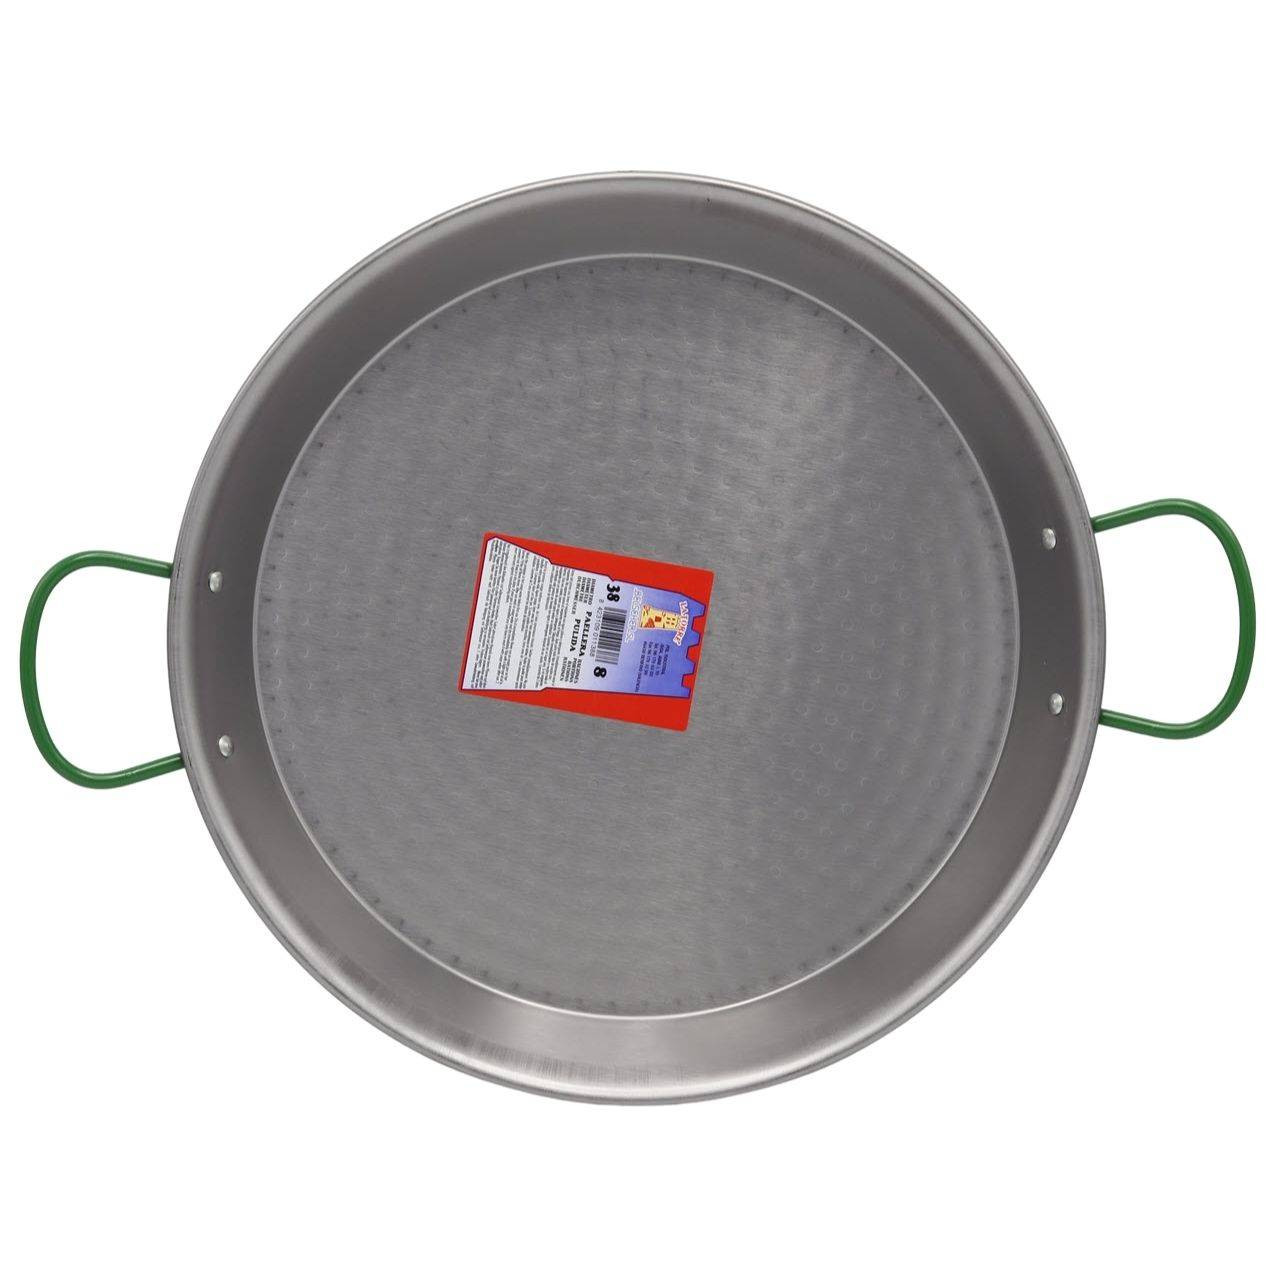 Belseher 15-Inch Paella Pan, Paella Cooker